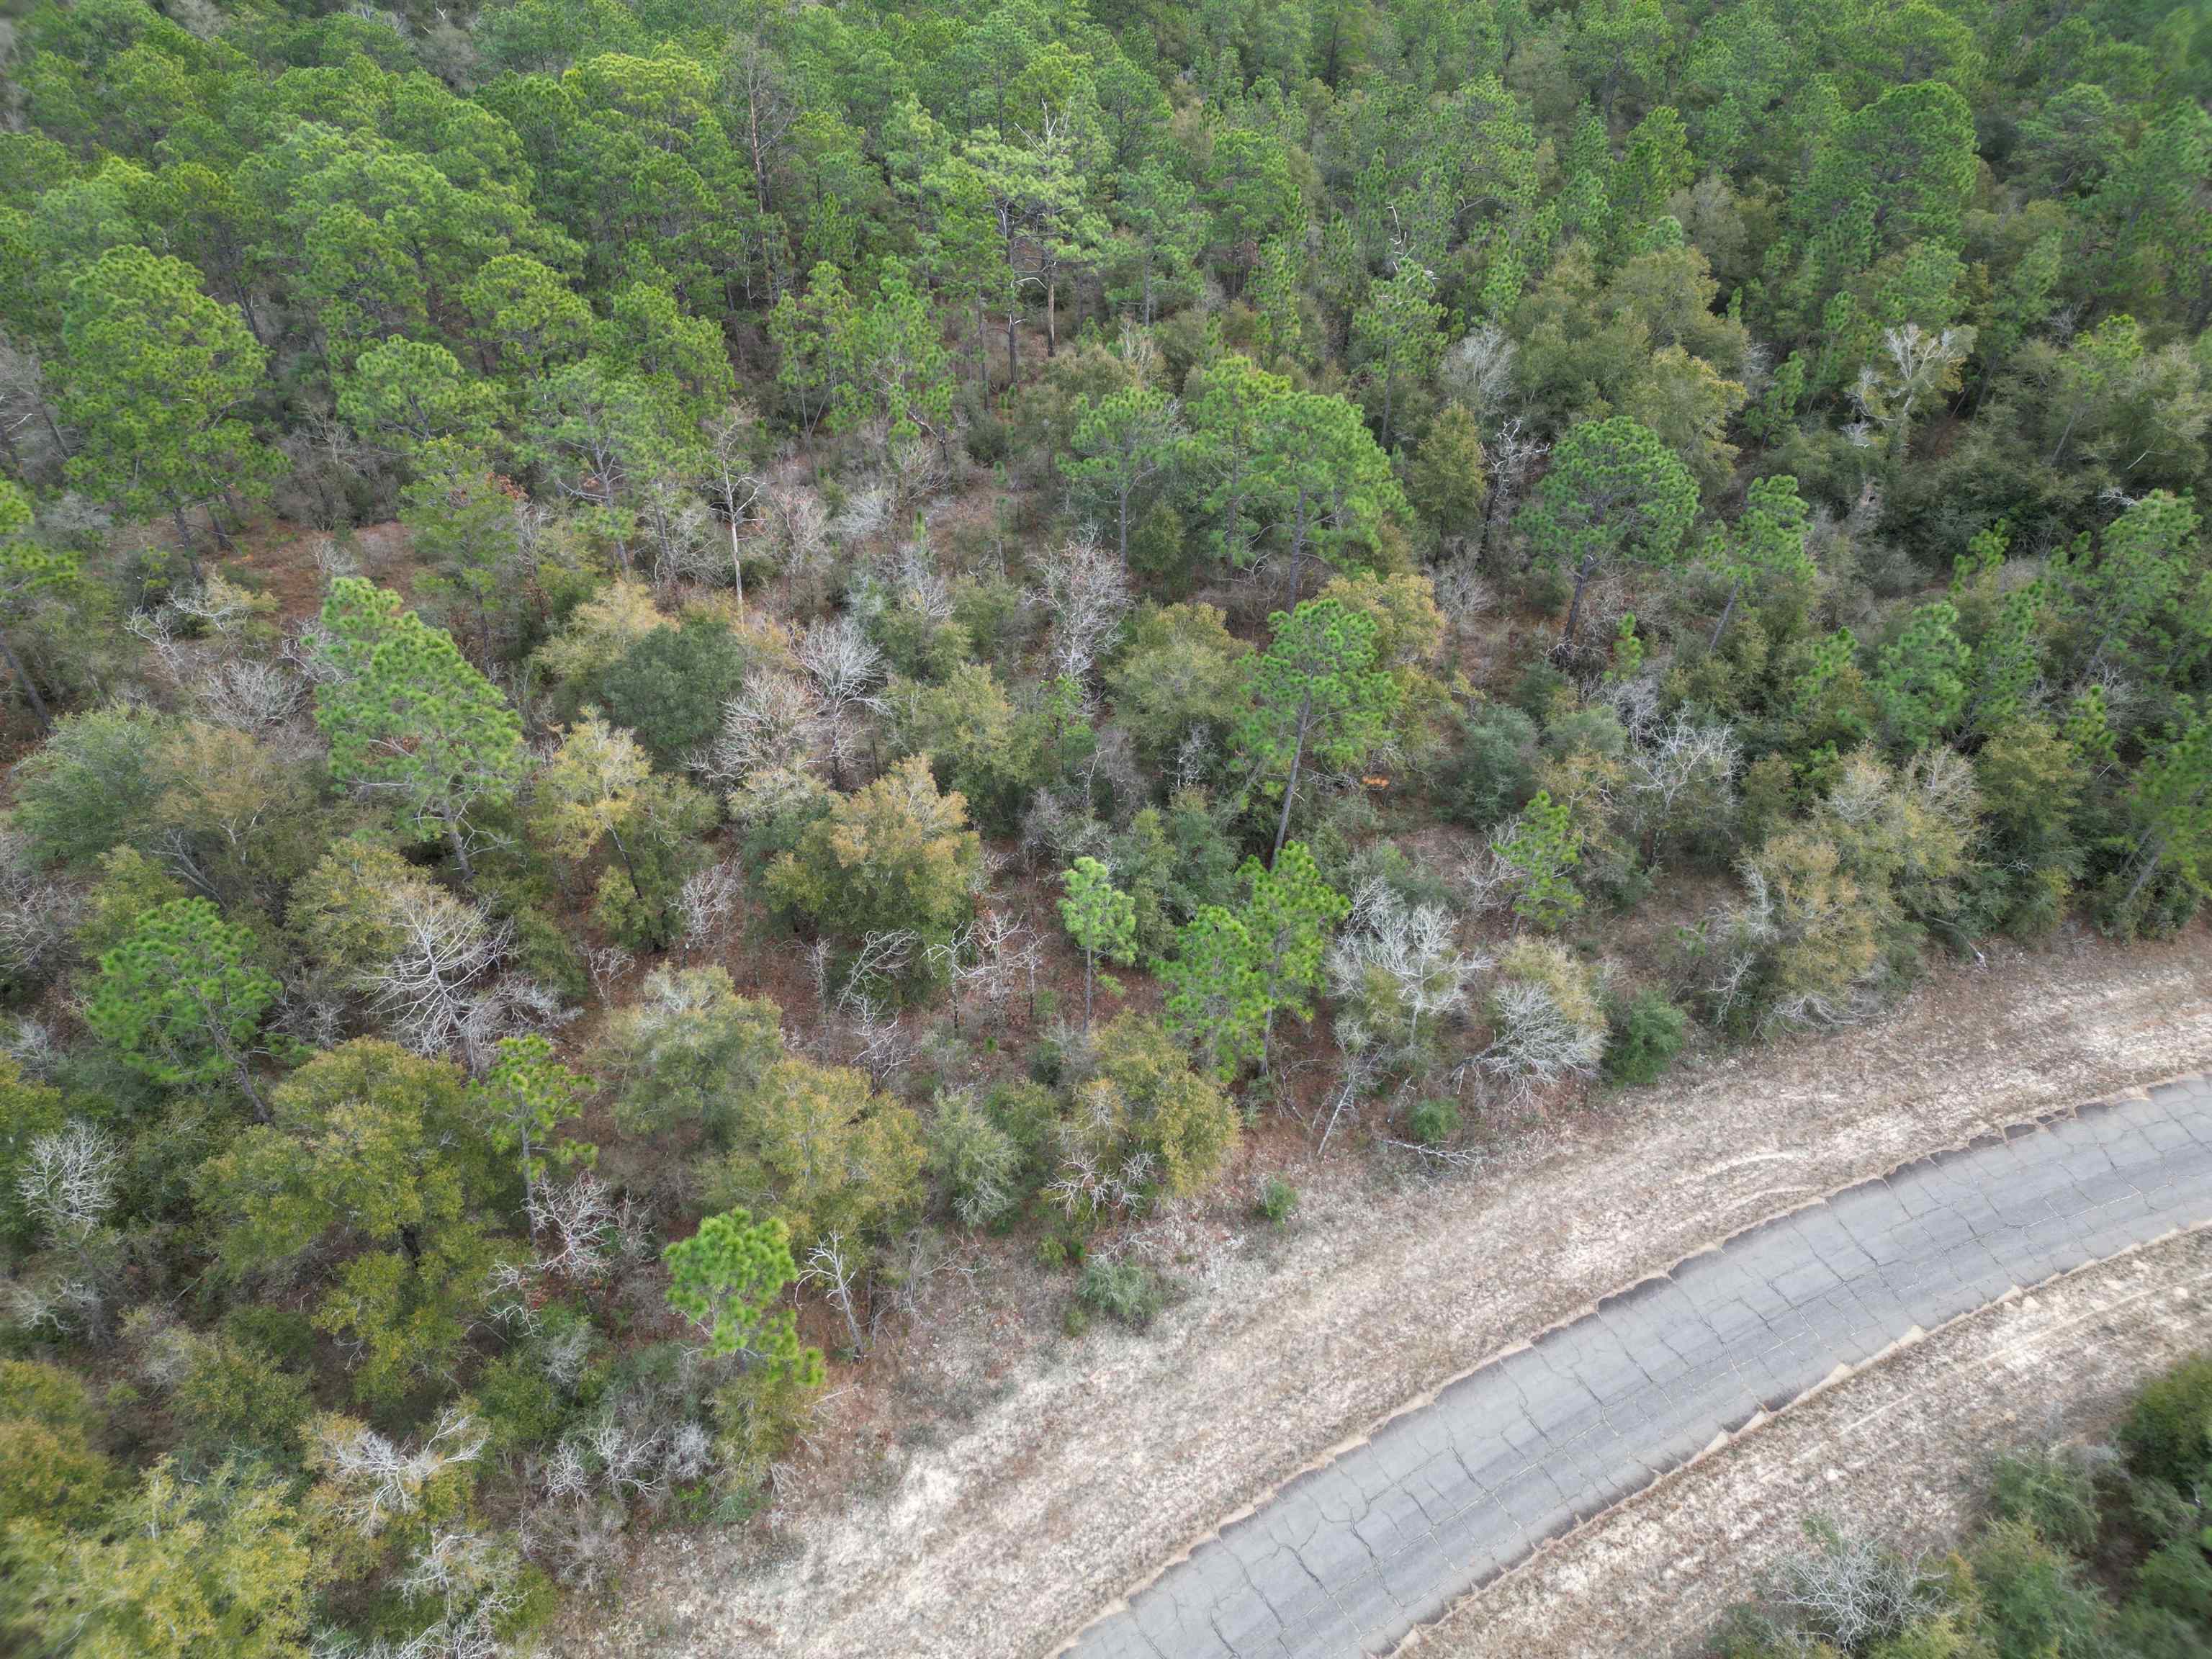 Amherst,CHIPLEY,Florida 32428,Lots and land,Amherst,367190